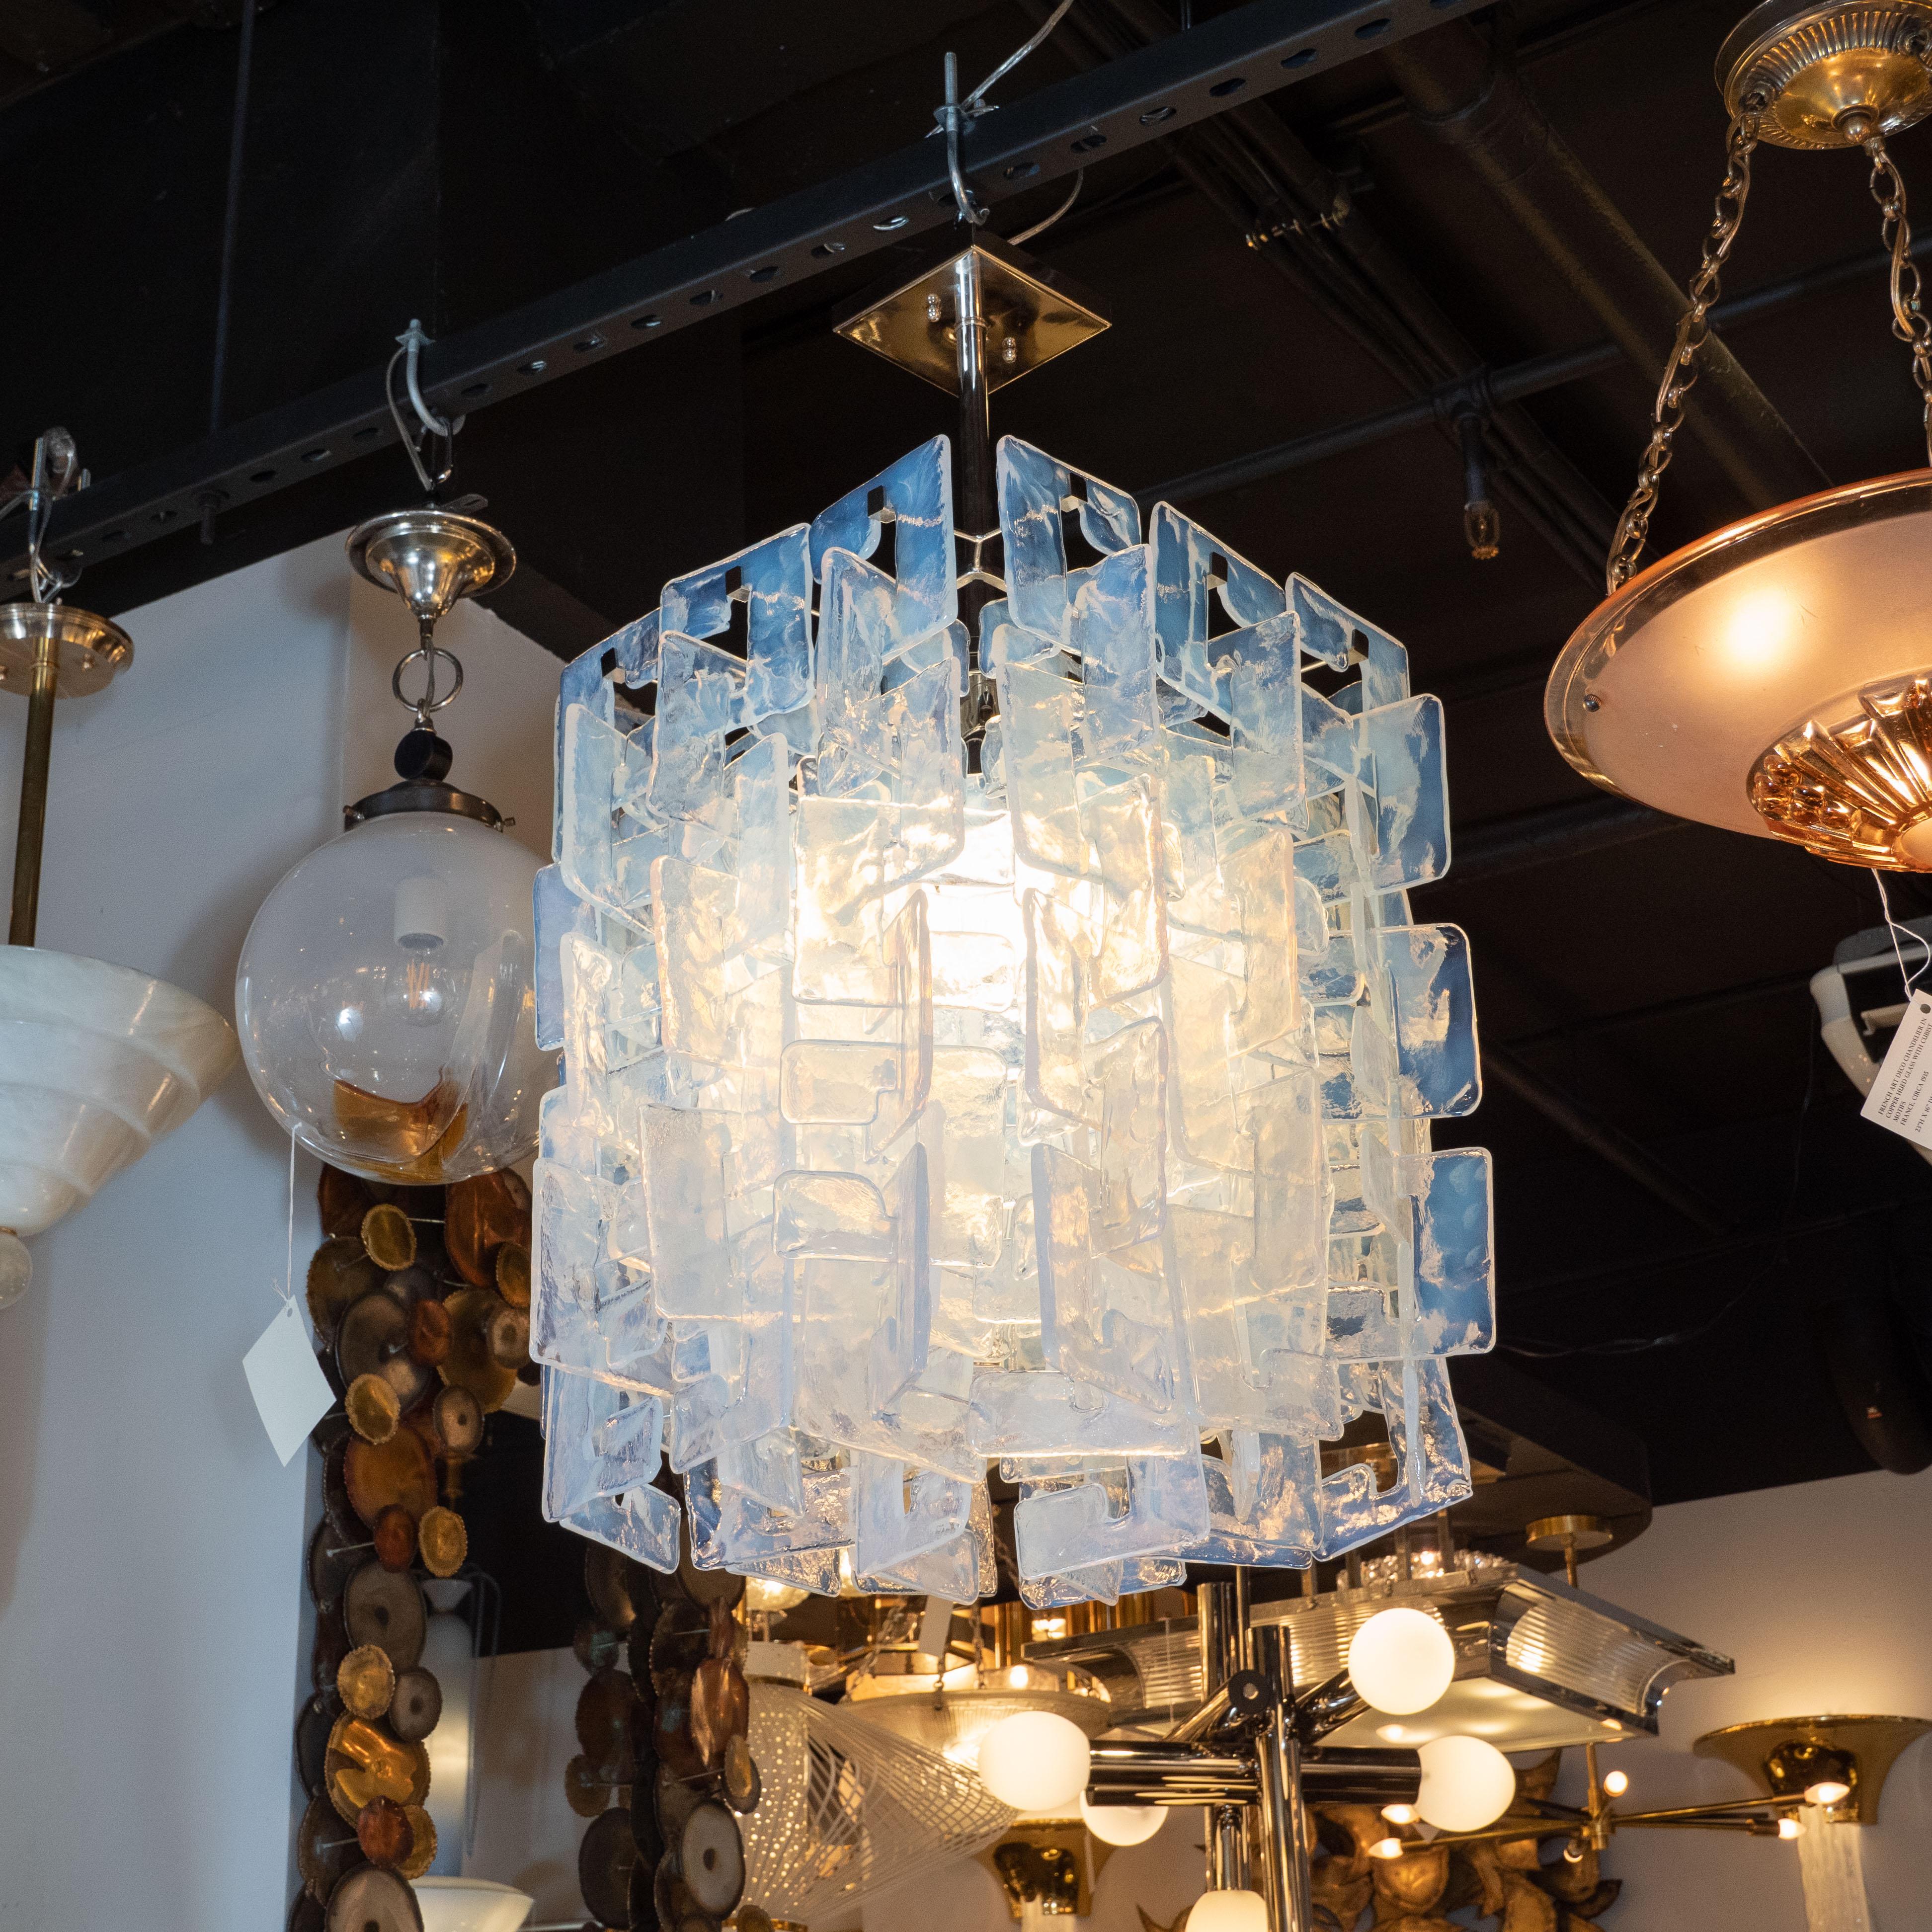 This stunning modernist chandelier was realized in Murano, Italy, the island off the coast of Venice renowned for centuries for its superlative glass production. It features rectangular bodies consisting of an abundance of translucent interlocking